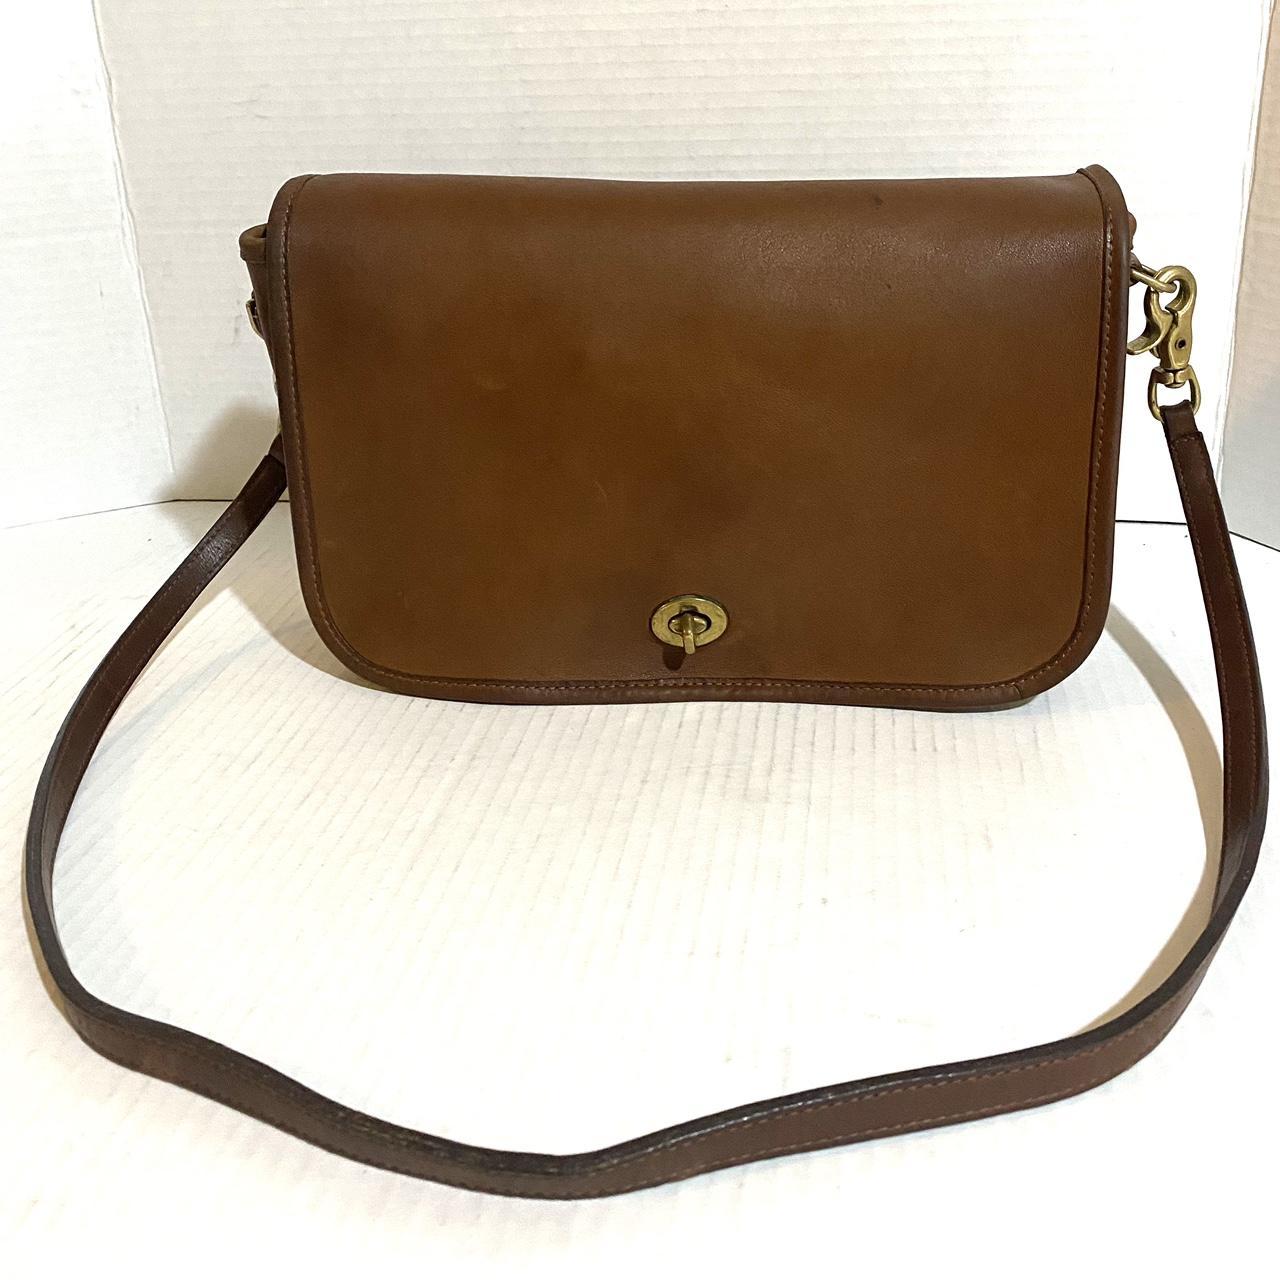 Vintage Coach Bag Penny Pocket in Ivory Leather Crossbody 